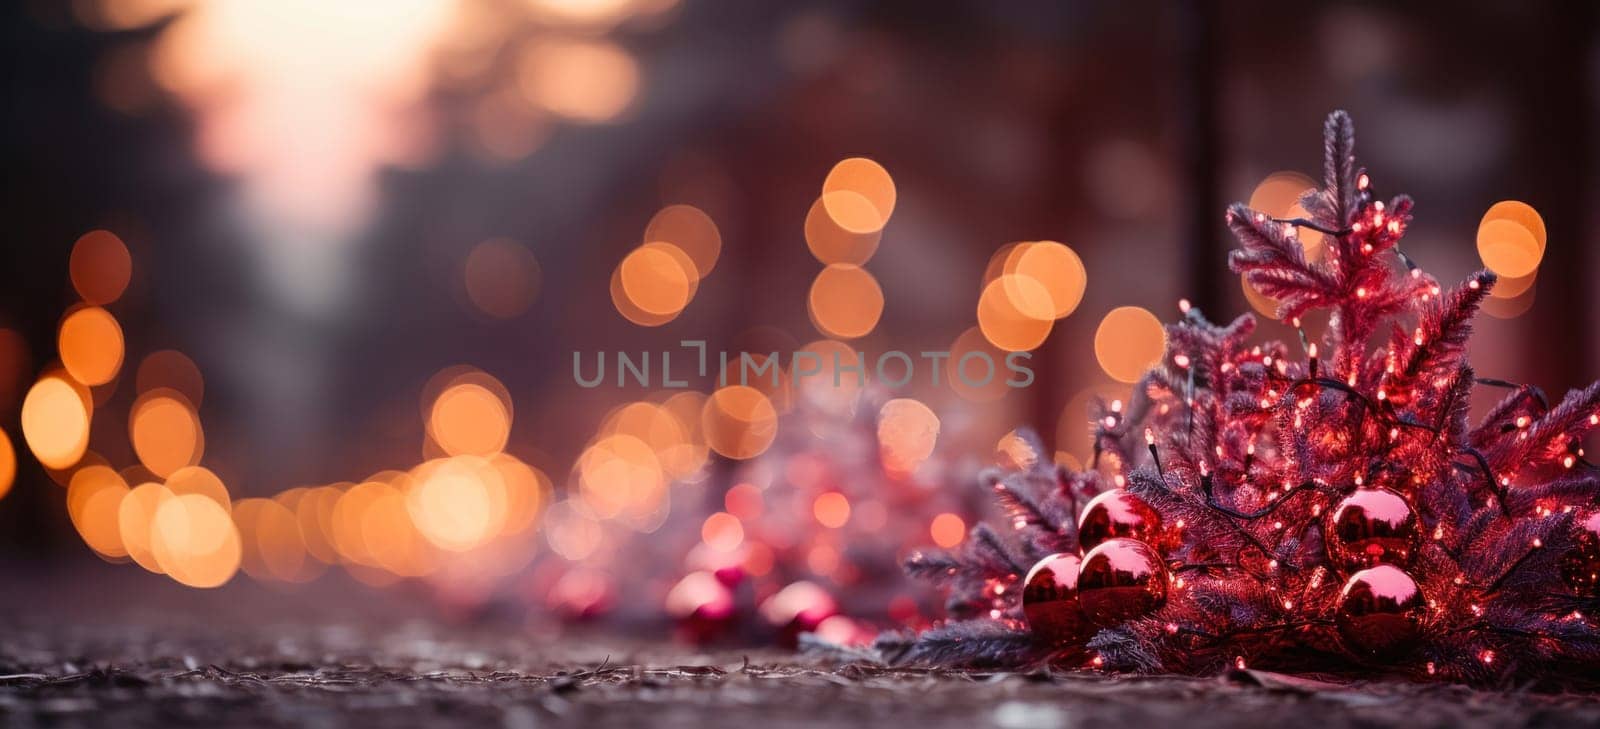 Background with Christmas trees, Christmas balls and blurred bokeh creates a festive atmosphere.